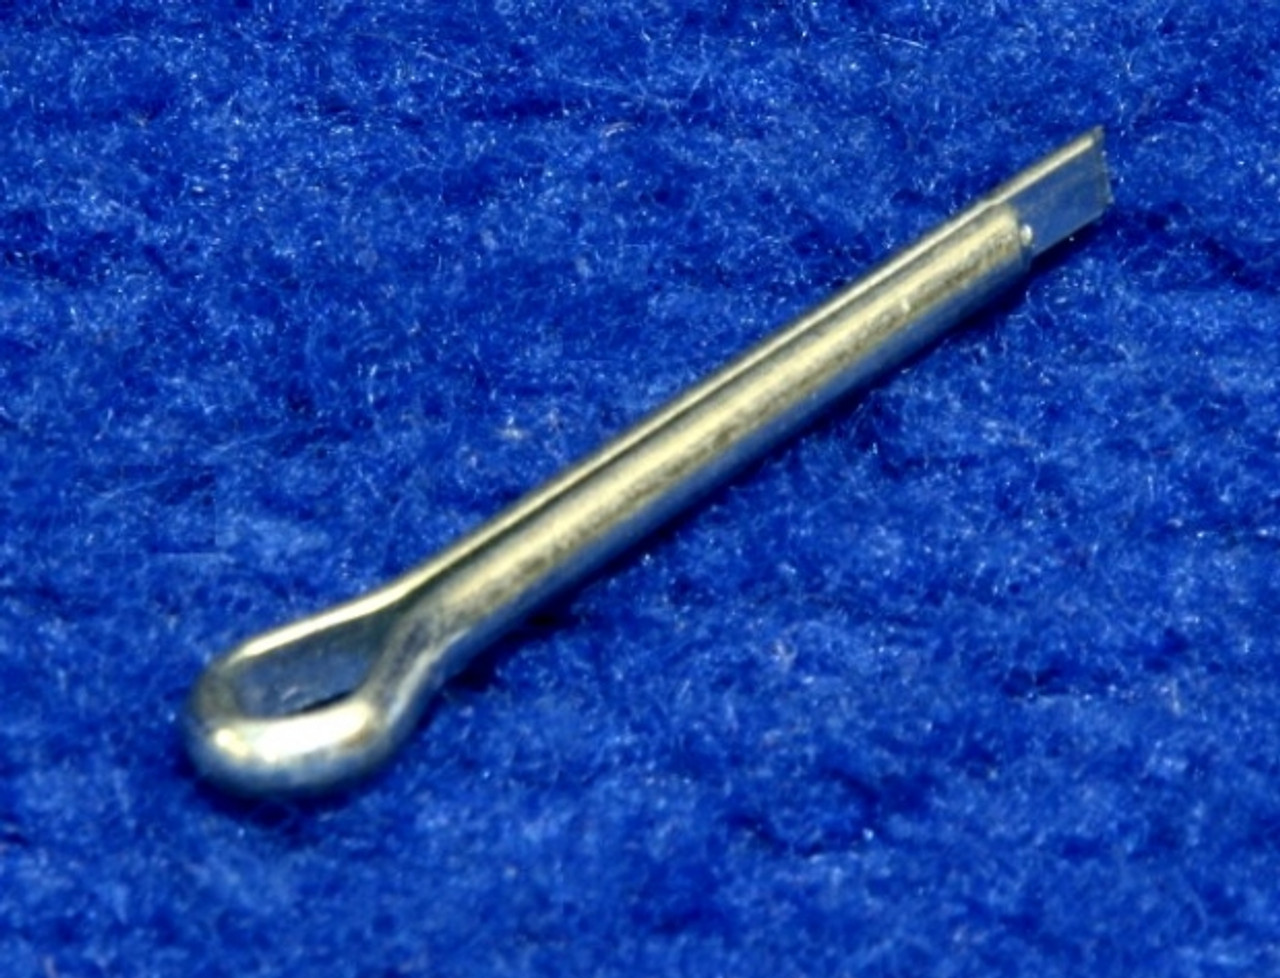 8851711: Taylor-Dunn Aftermarket 3/32 X 1 Steel Cotter Pin Gr2